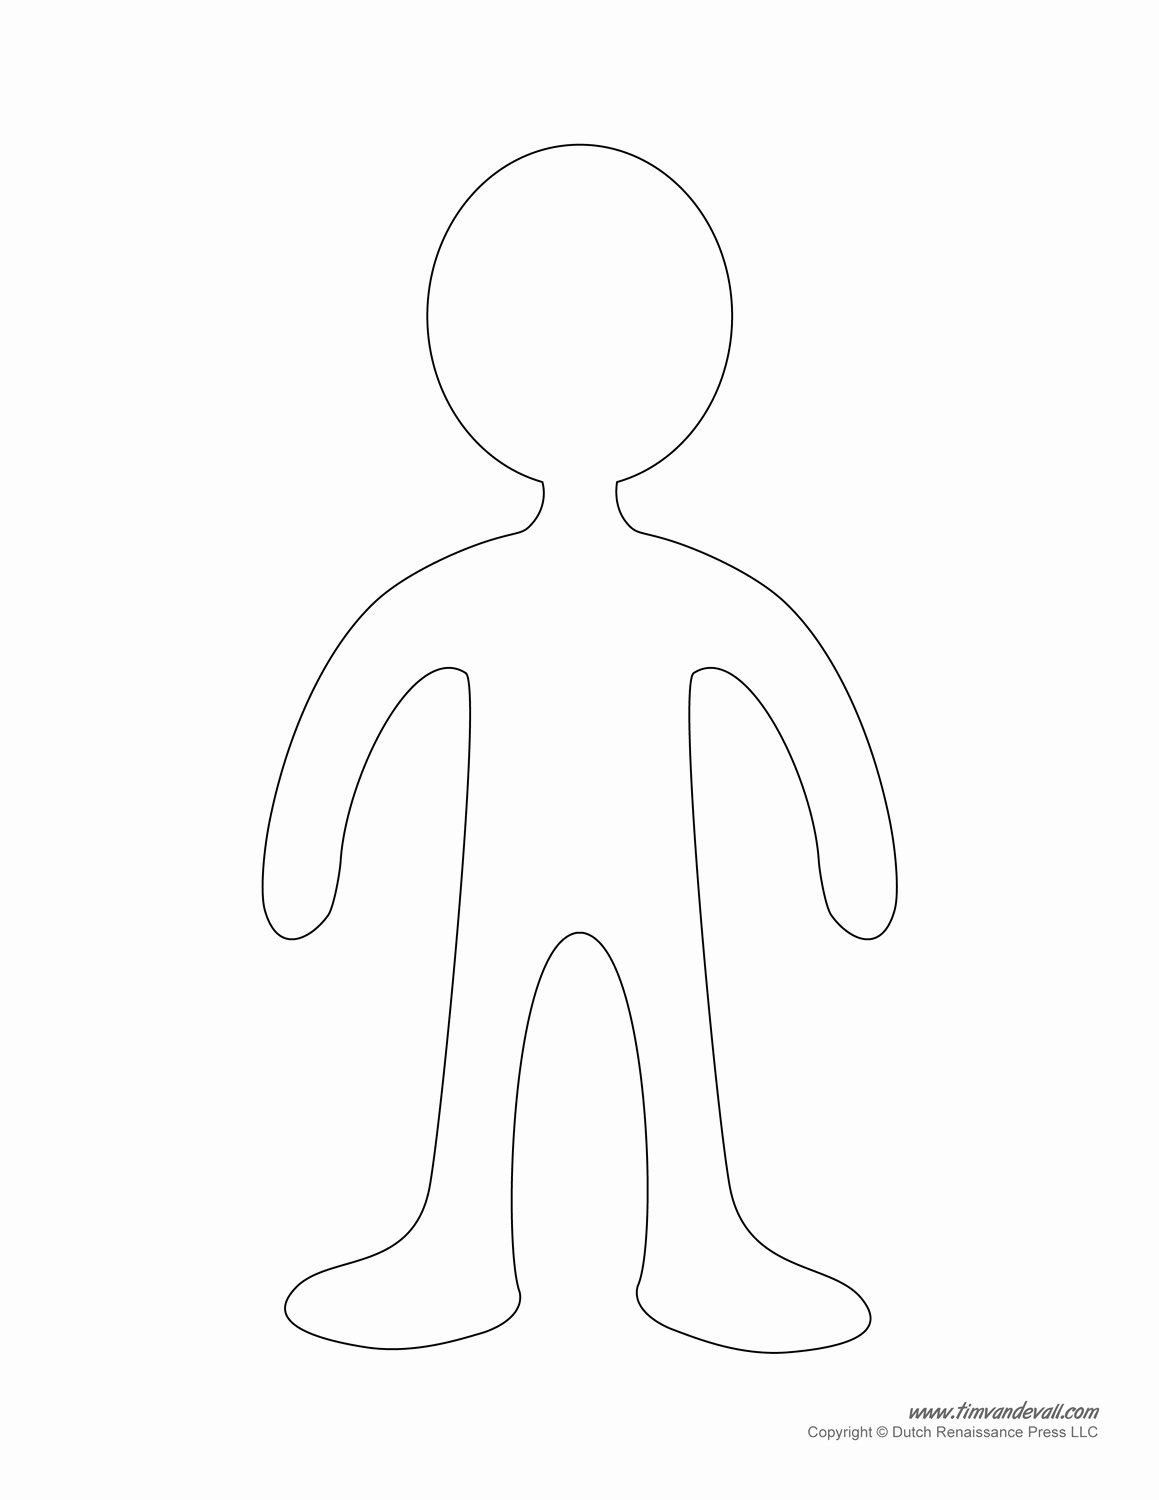 Printable Paper Dolls Template Luxury Printable Paper Doll Templates